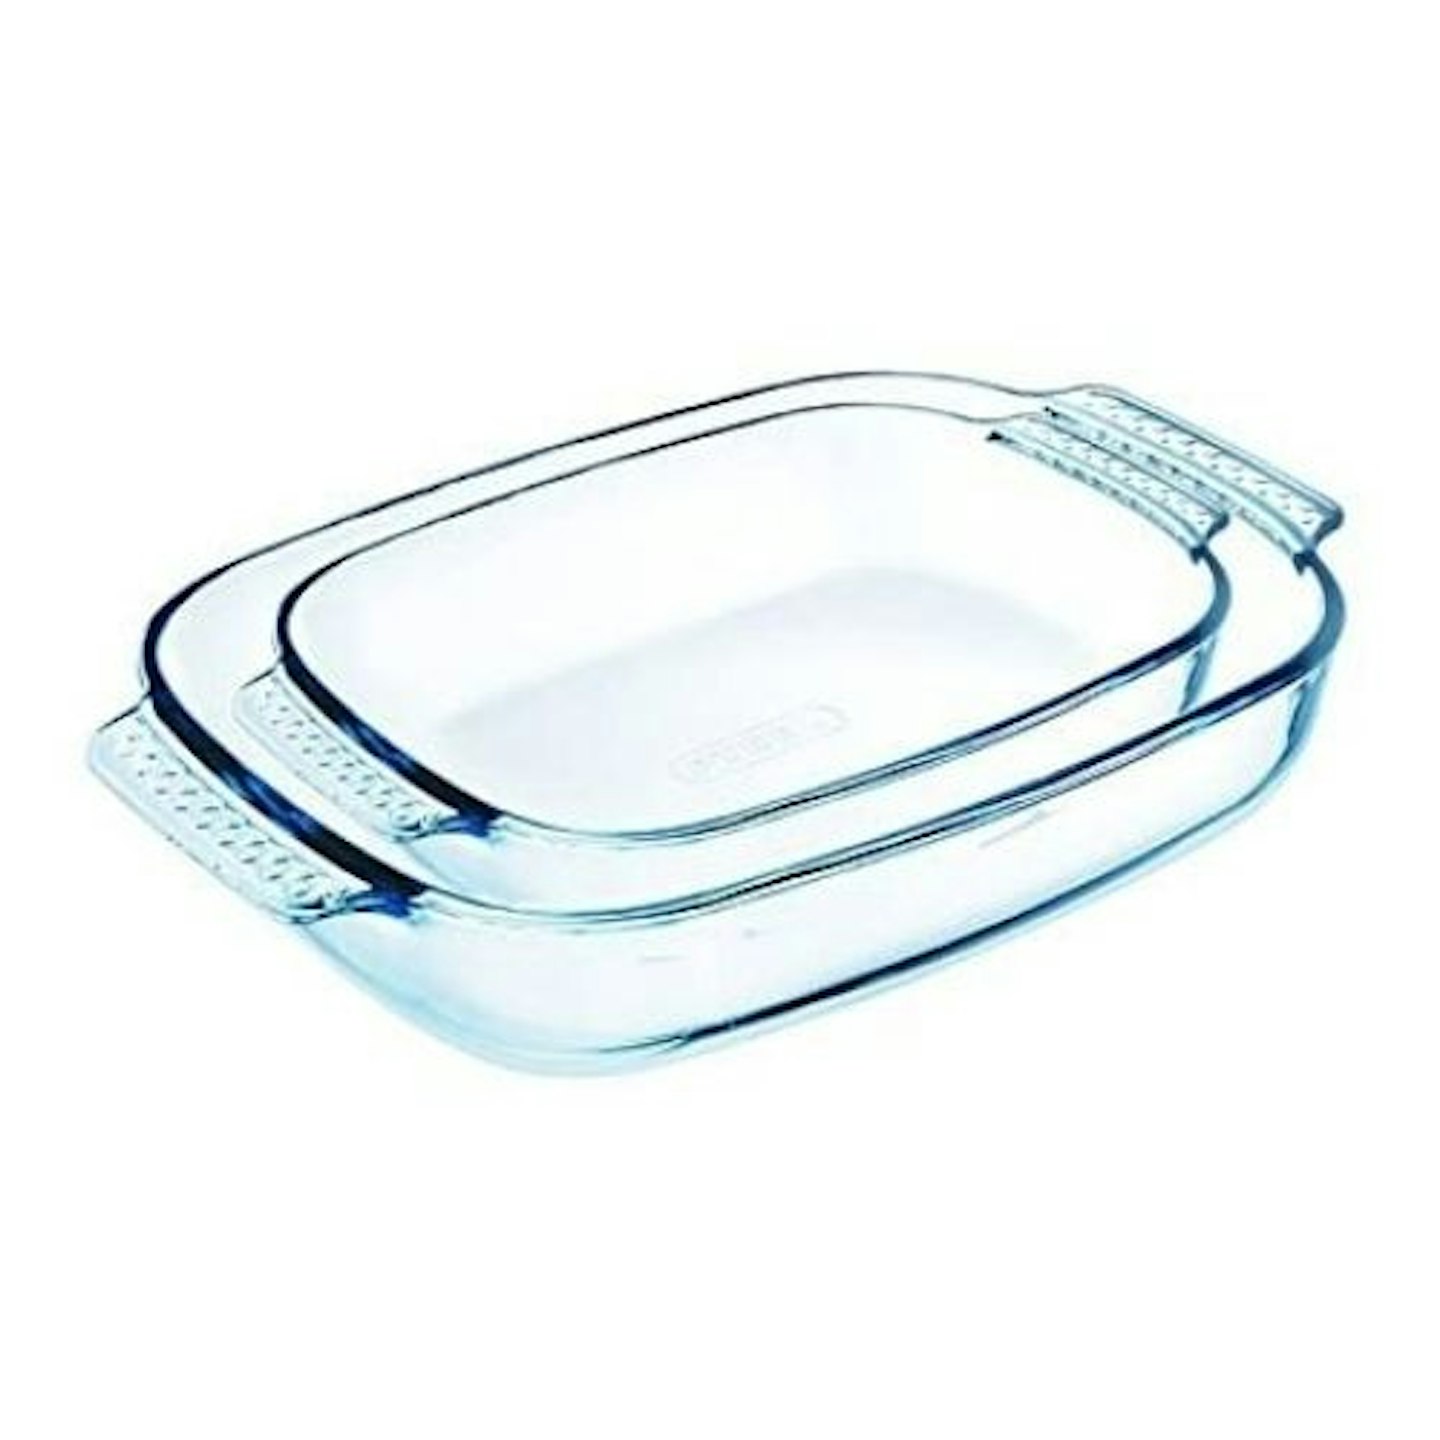 Pyrex Classic – Heavy Duty Rectangular Glass Baking Dishes (Set of 2)